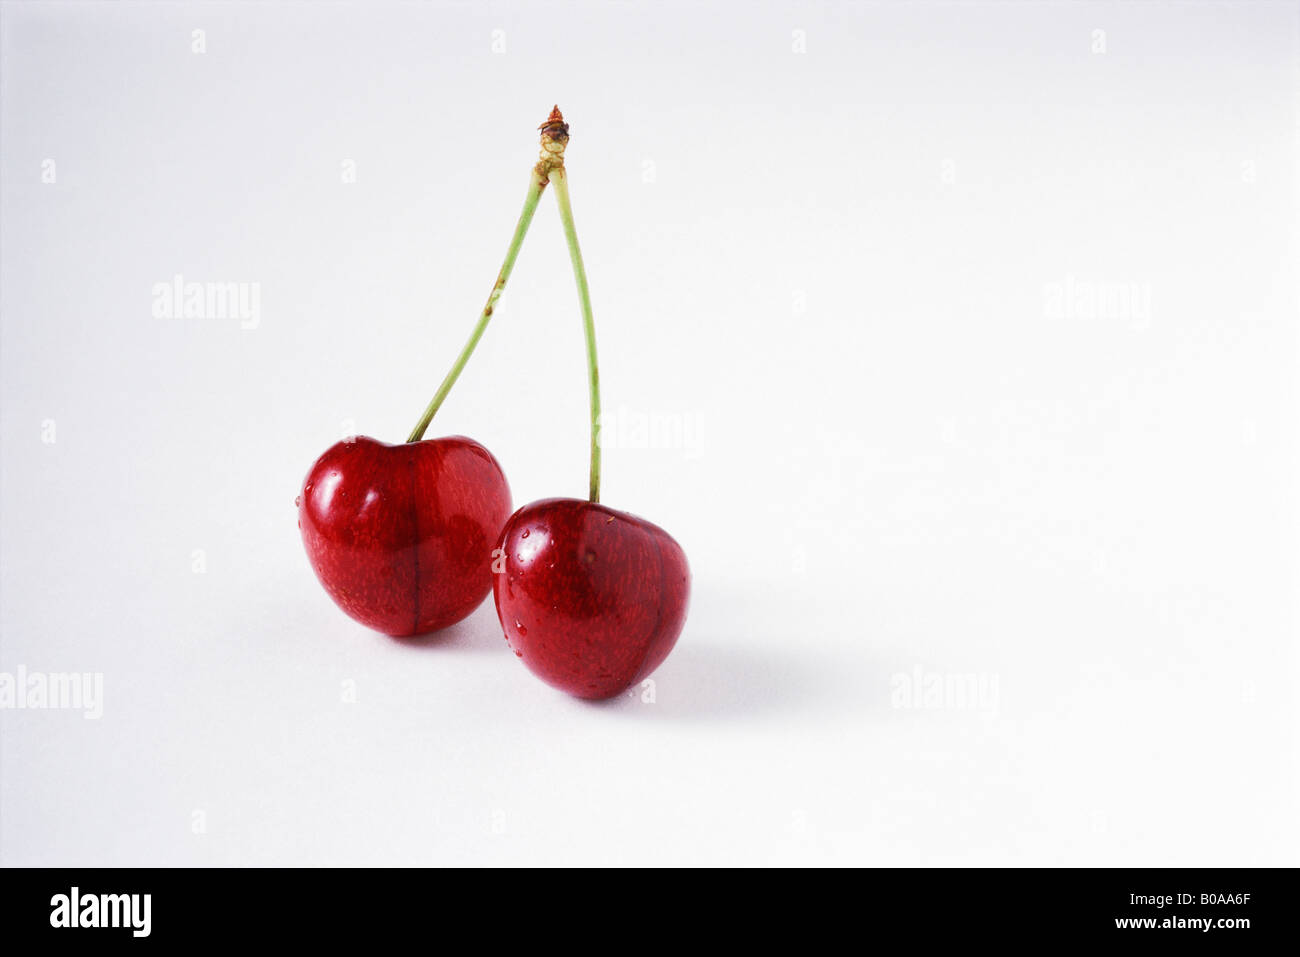 Two cherries on joined stems, close-up Stock Photo